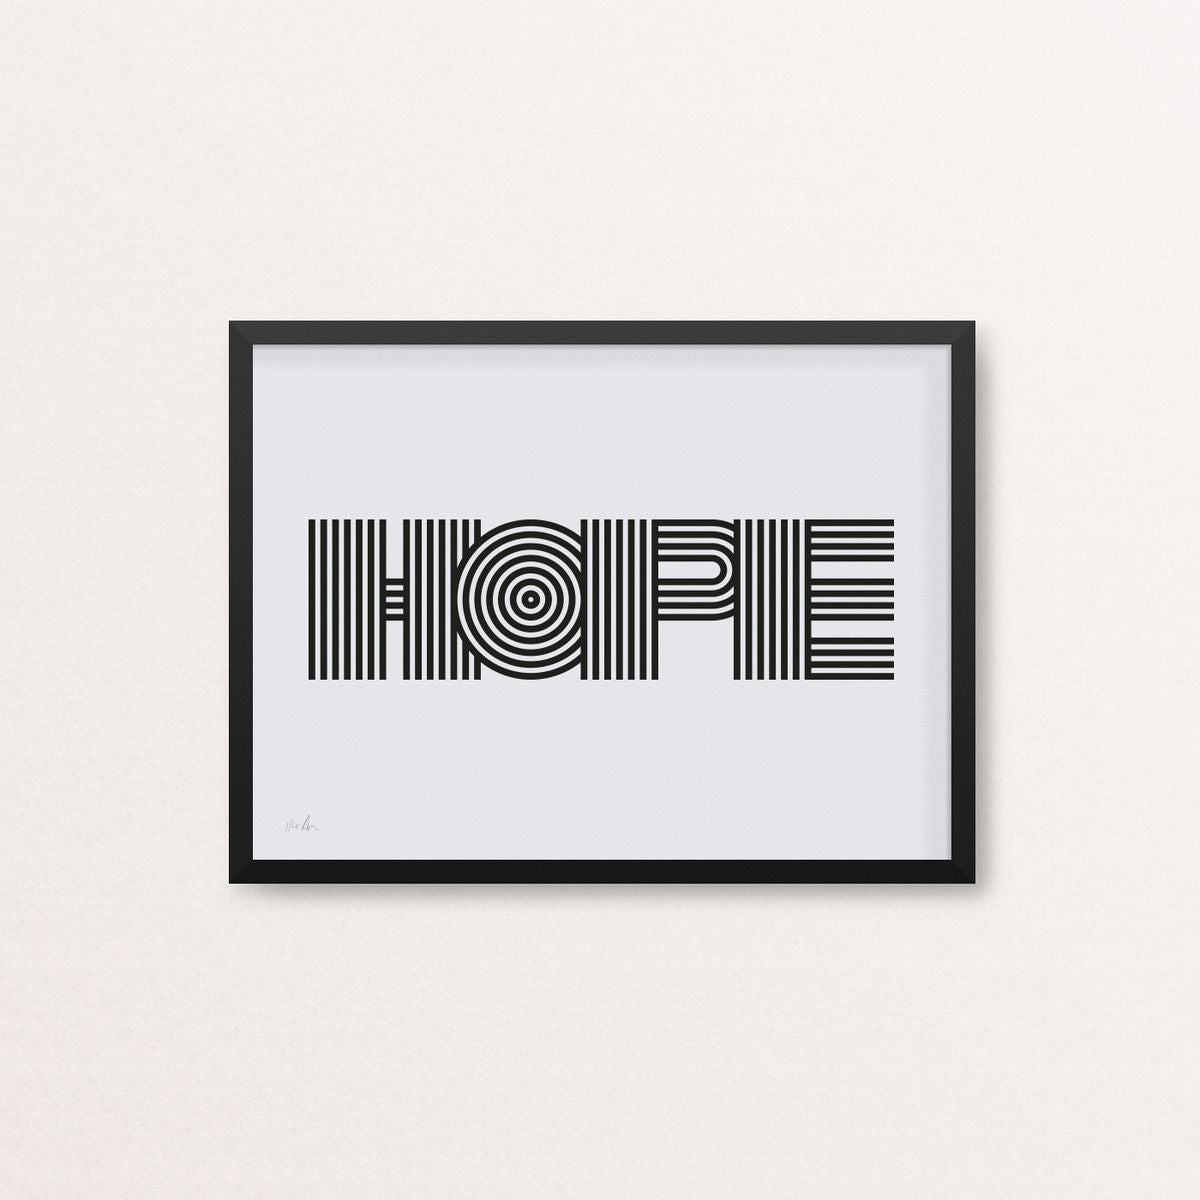 Hope - Limited Edition Screen Print